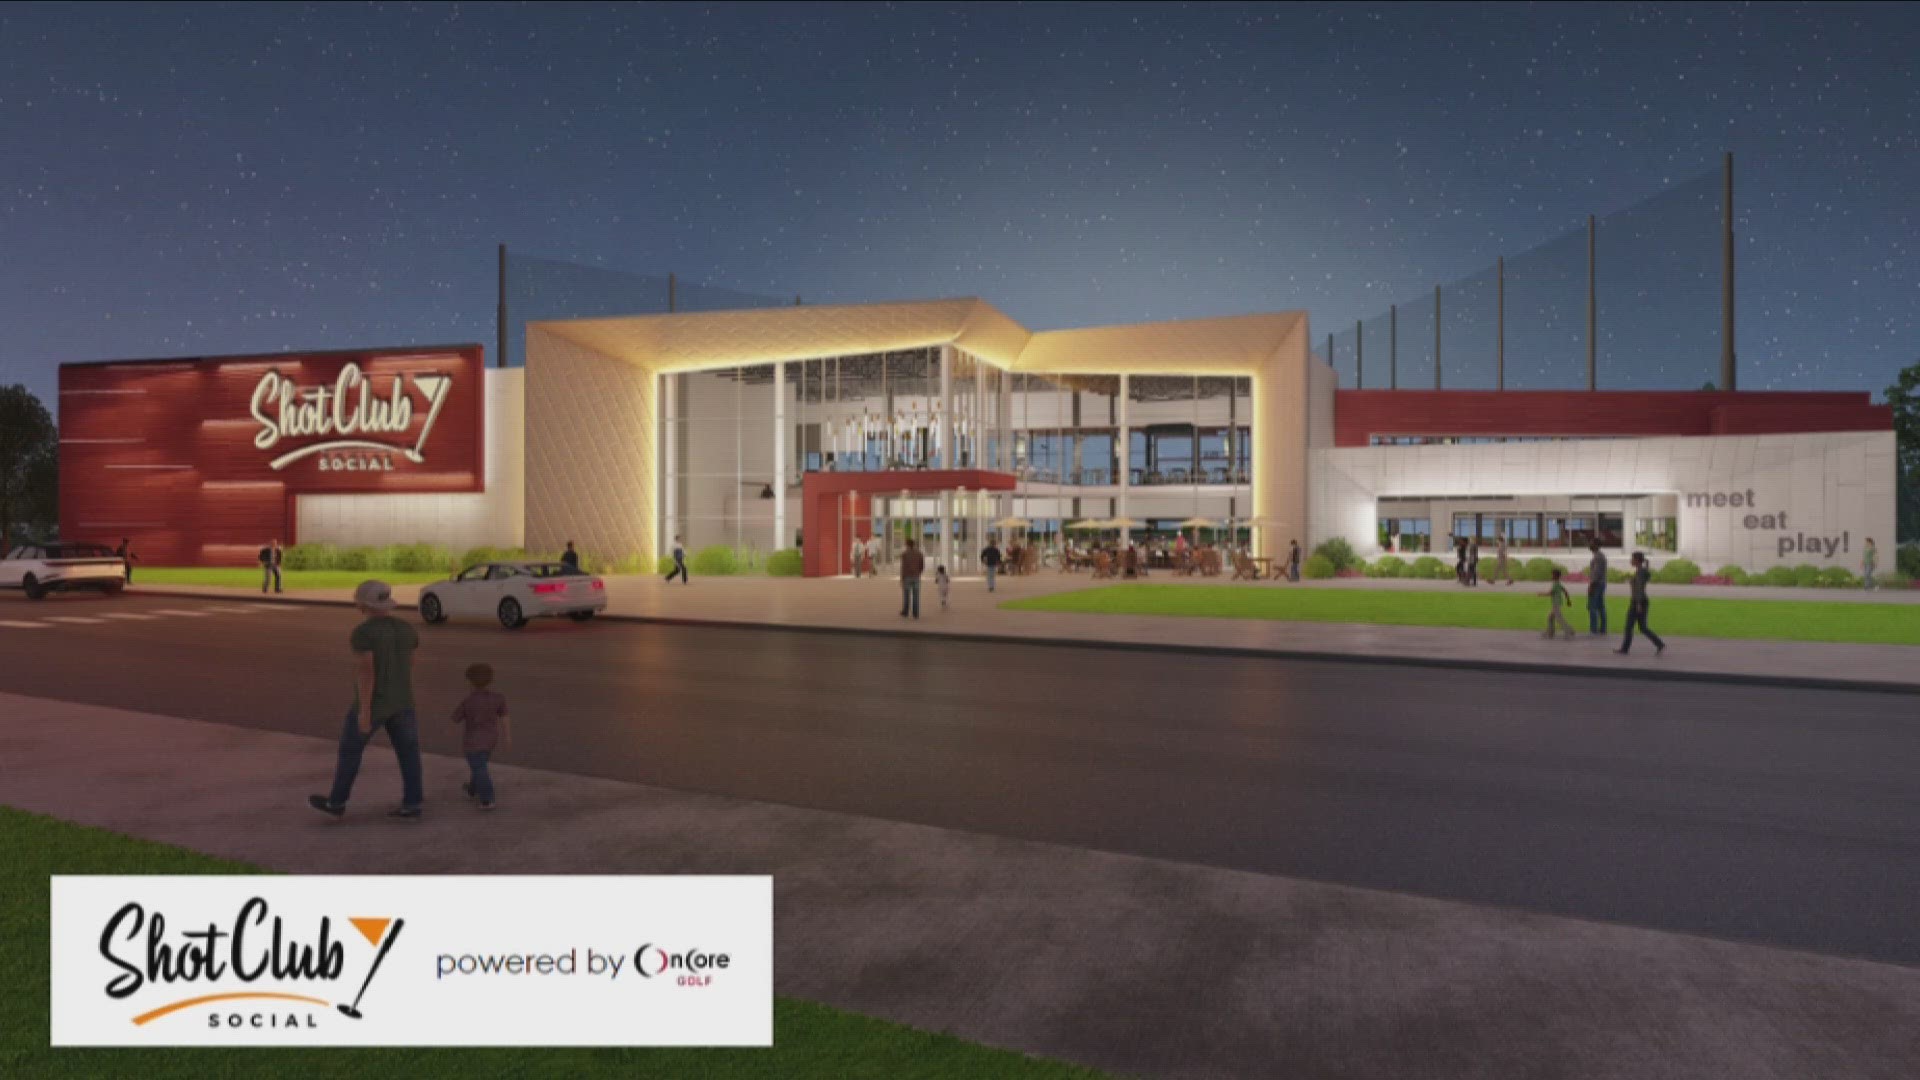 The $30 million sports entertainment complex will include a driving range, bowling, arcade games, and more.